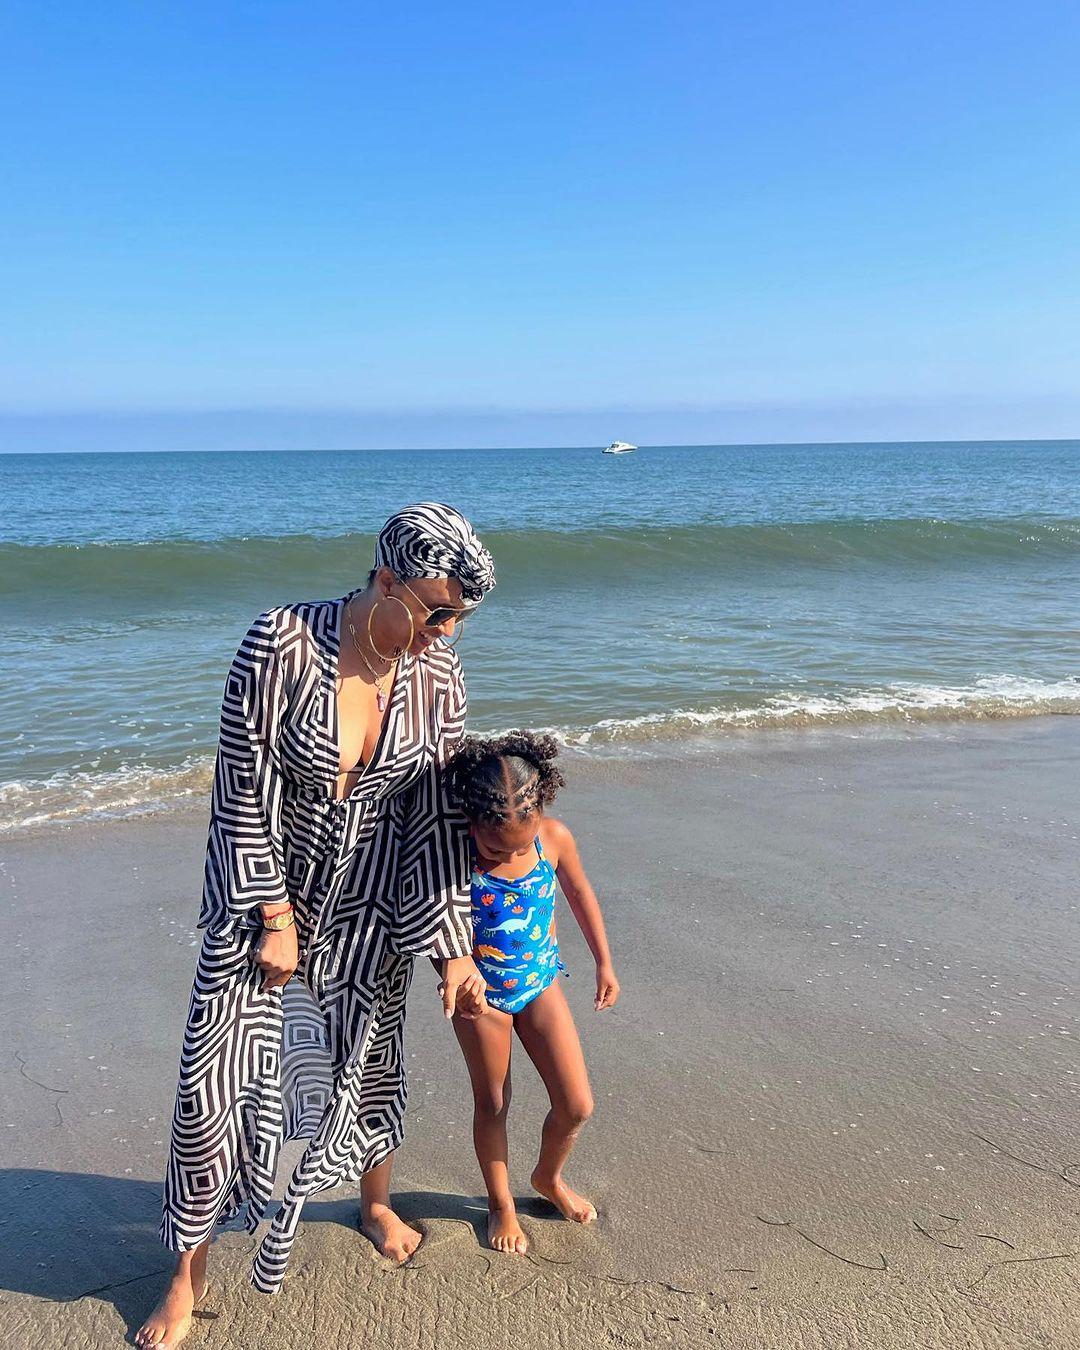 Tia Mowry puts assets on display as she enjoys beach day with daughter